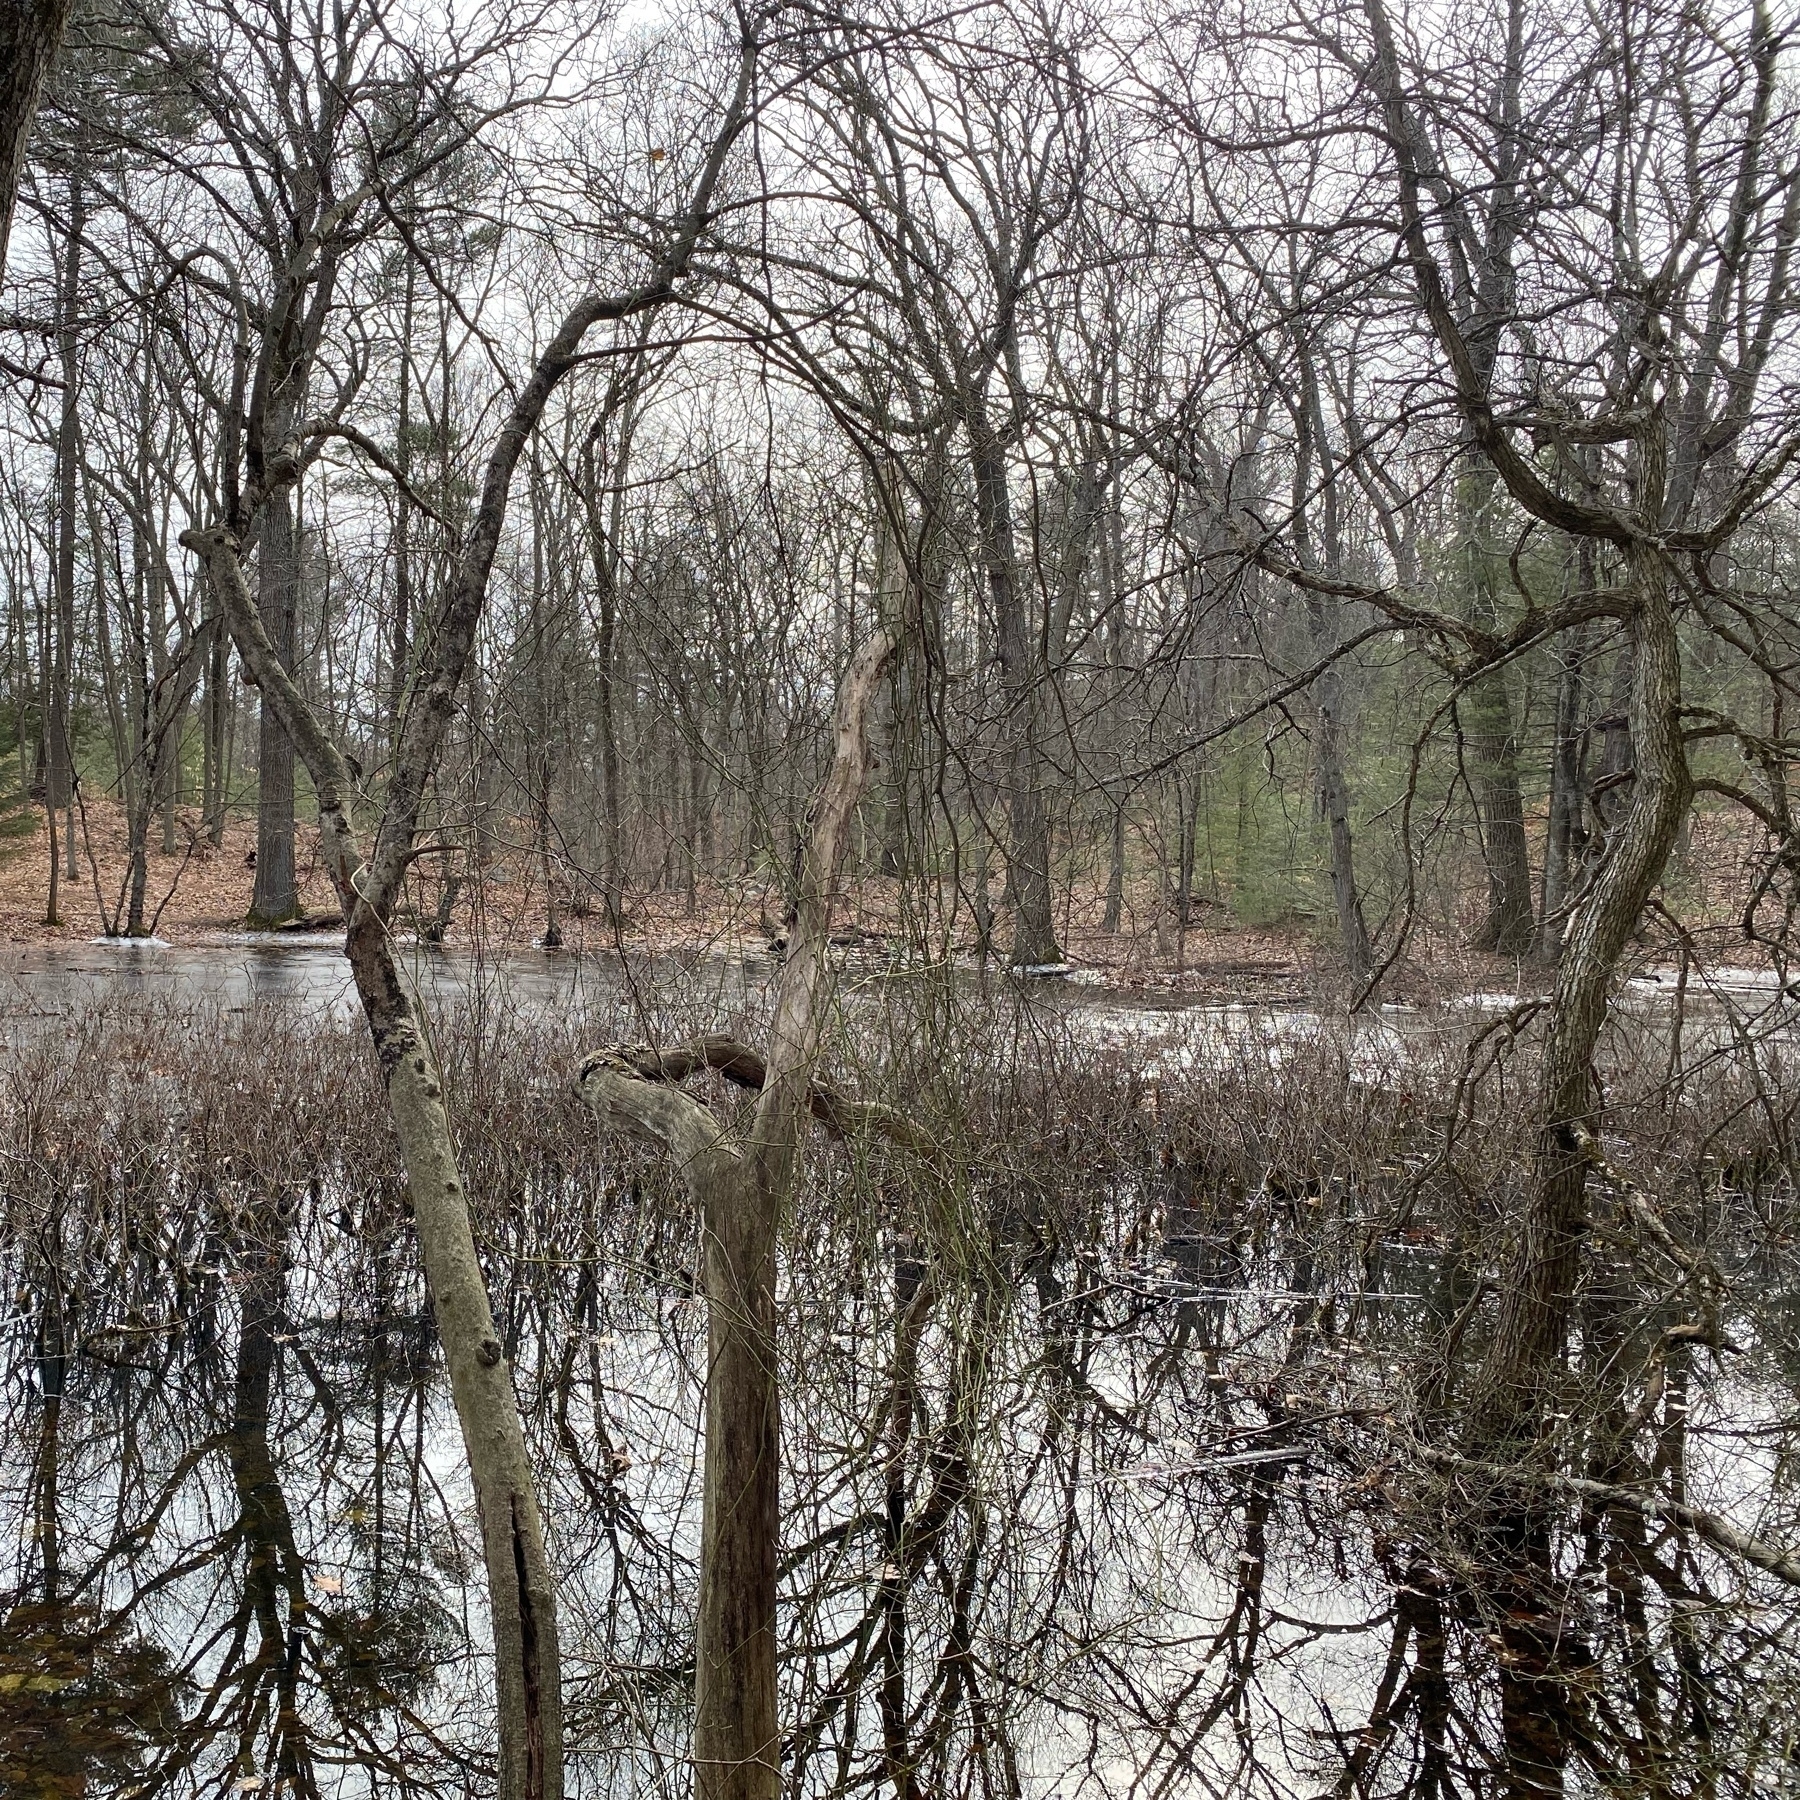 Small pond surrounded by leafless trees, which are reflected on the still water.  